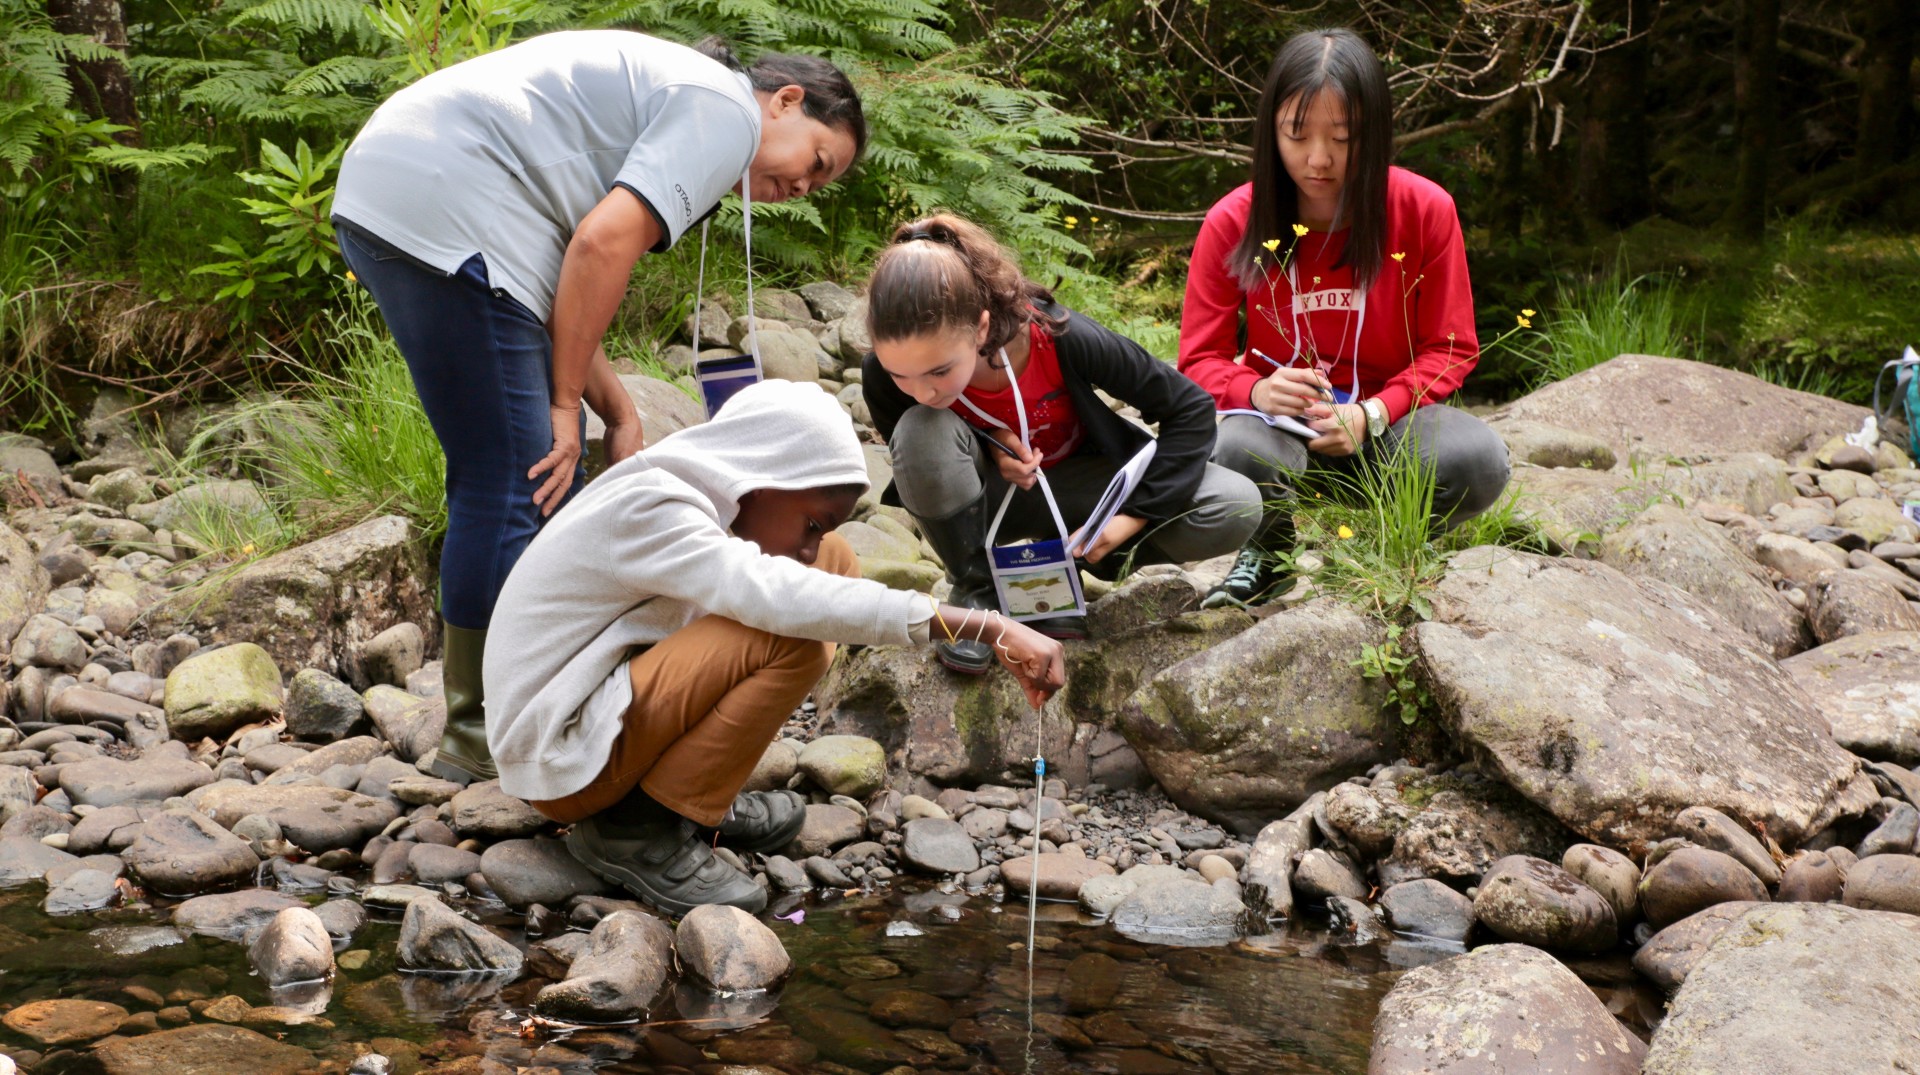 Four people crouch down near a river. One of the people collects a water sample with a glass or plastic pipette.